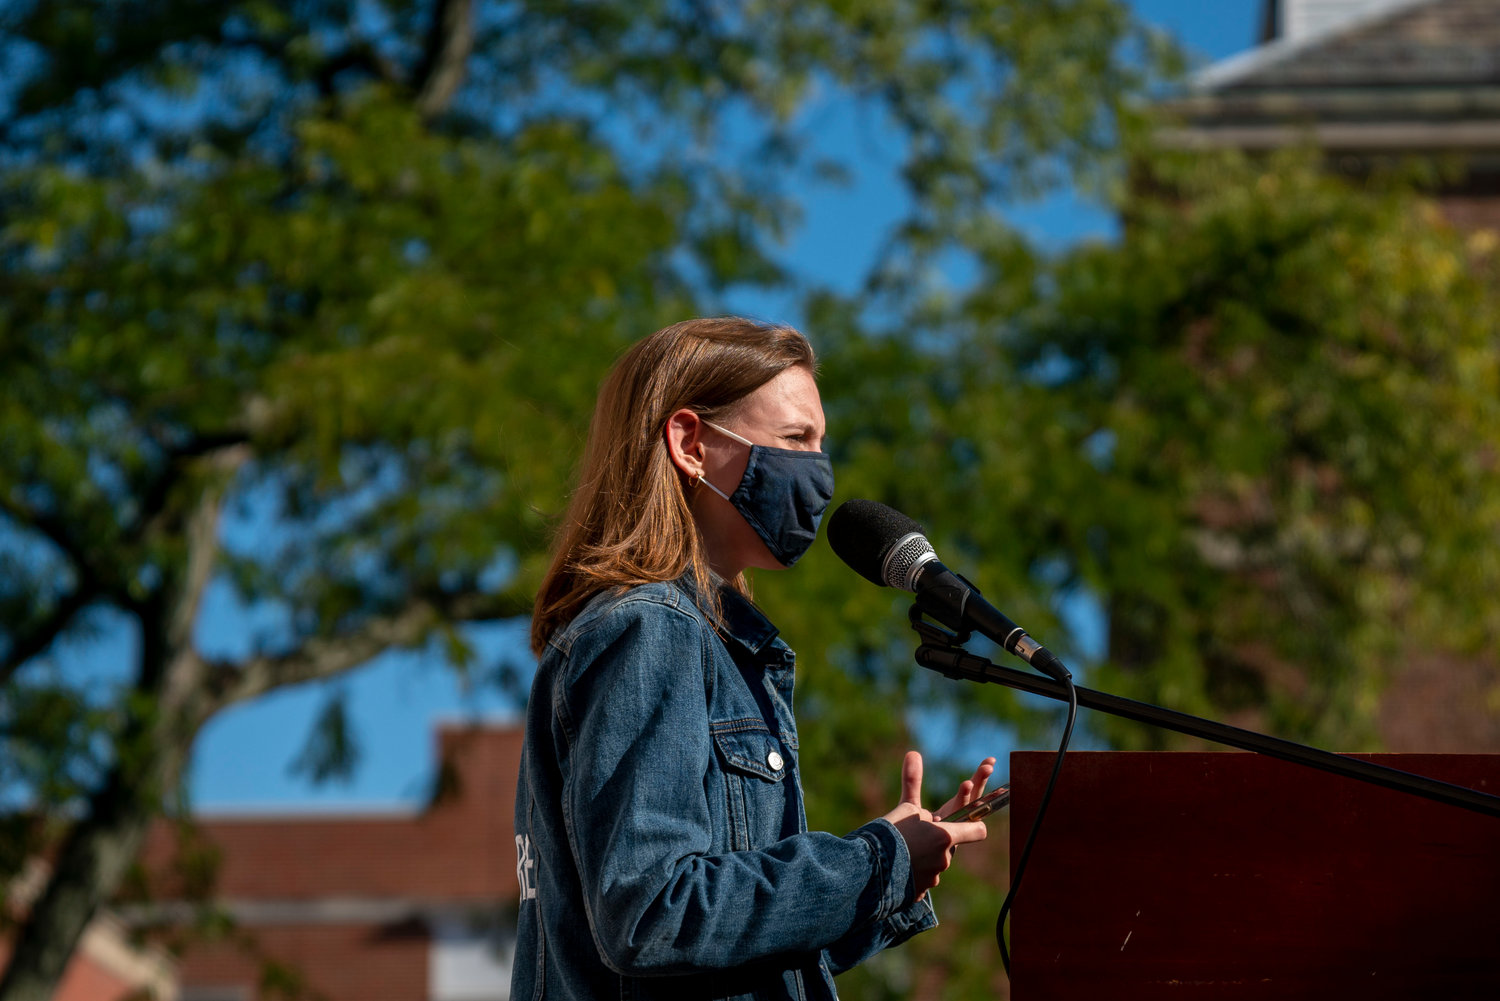 Alexandria Villaseñor, who spoke at Manhattan College’s ‘shoe strike’ Sept. 22, is a co-founder of U.S. Youth Climate Strike and the founder of Earth Uprising — both youth organizations advocating for action on climate change issues.